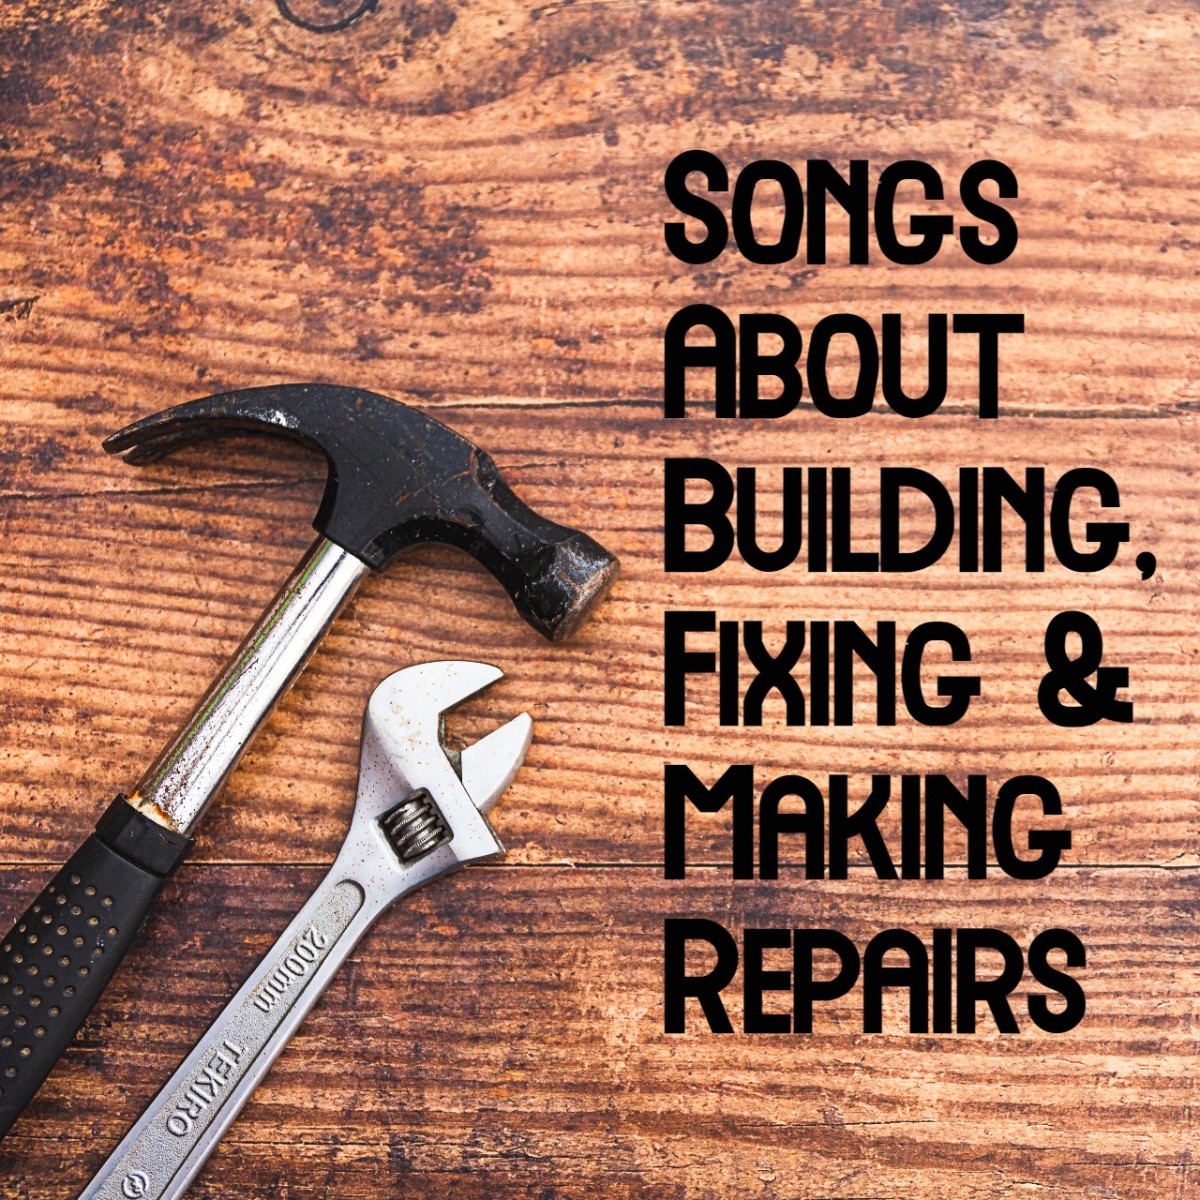 Whatever you're constructing, start with a good foundation. Celebrate building, fixing, and making repairs with a playlist of pop, rock, country, and R&B songs.